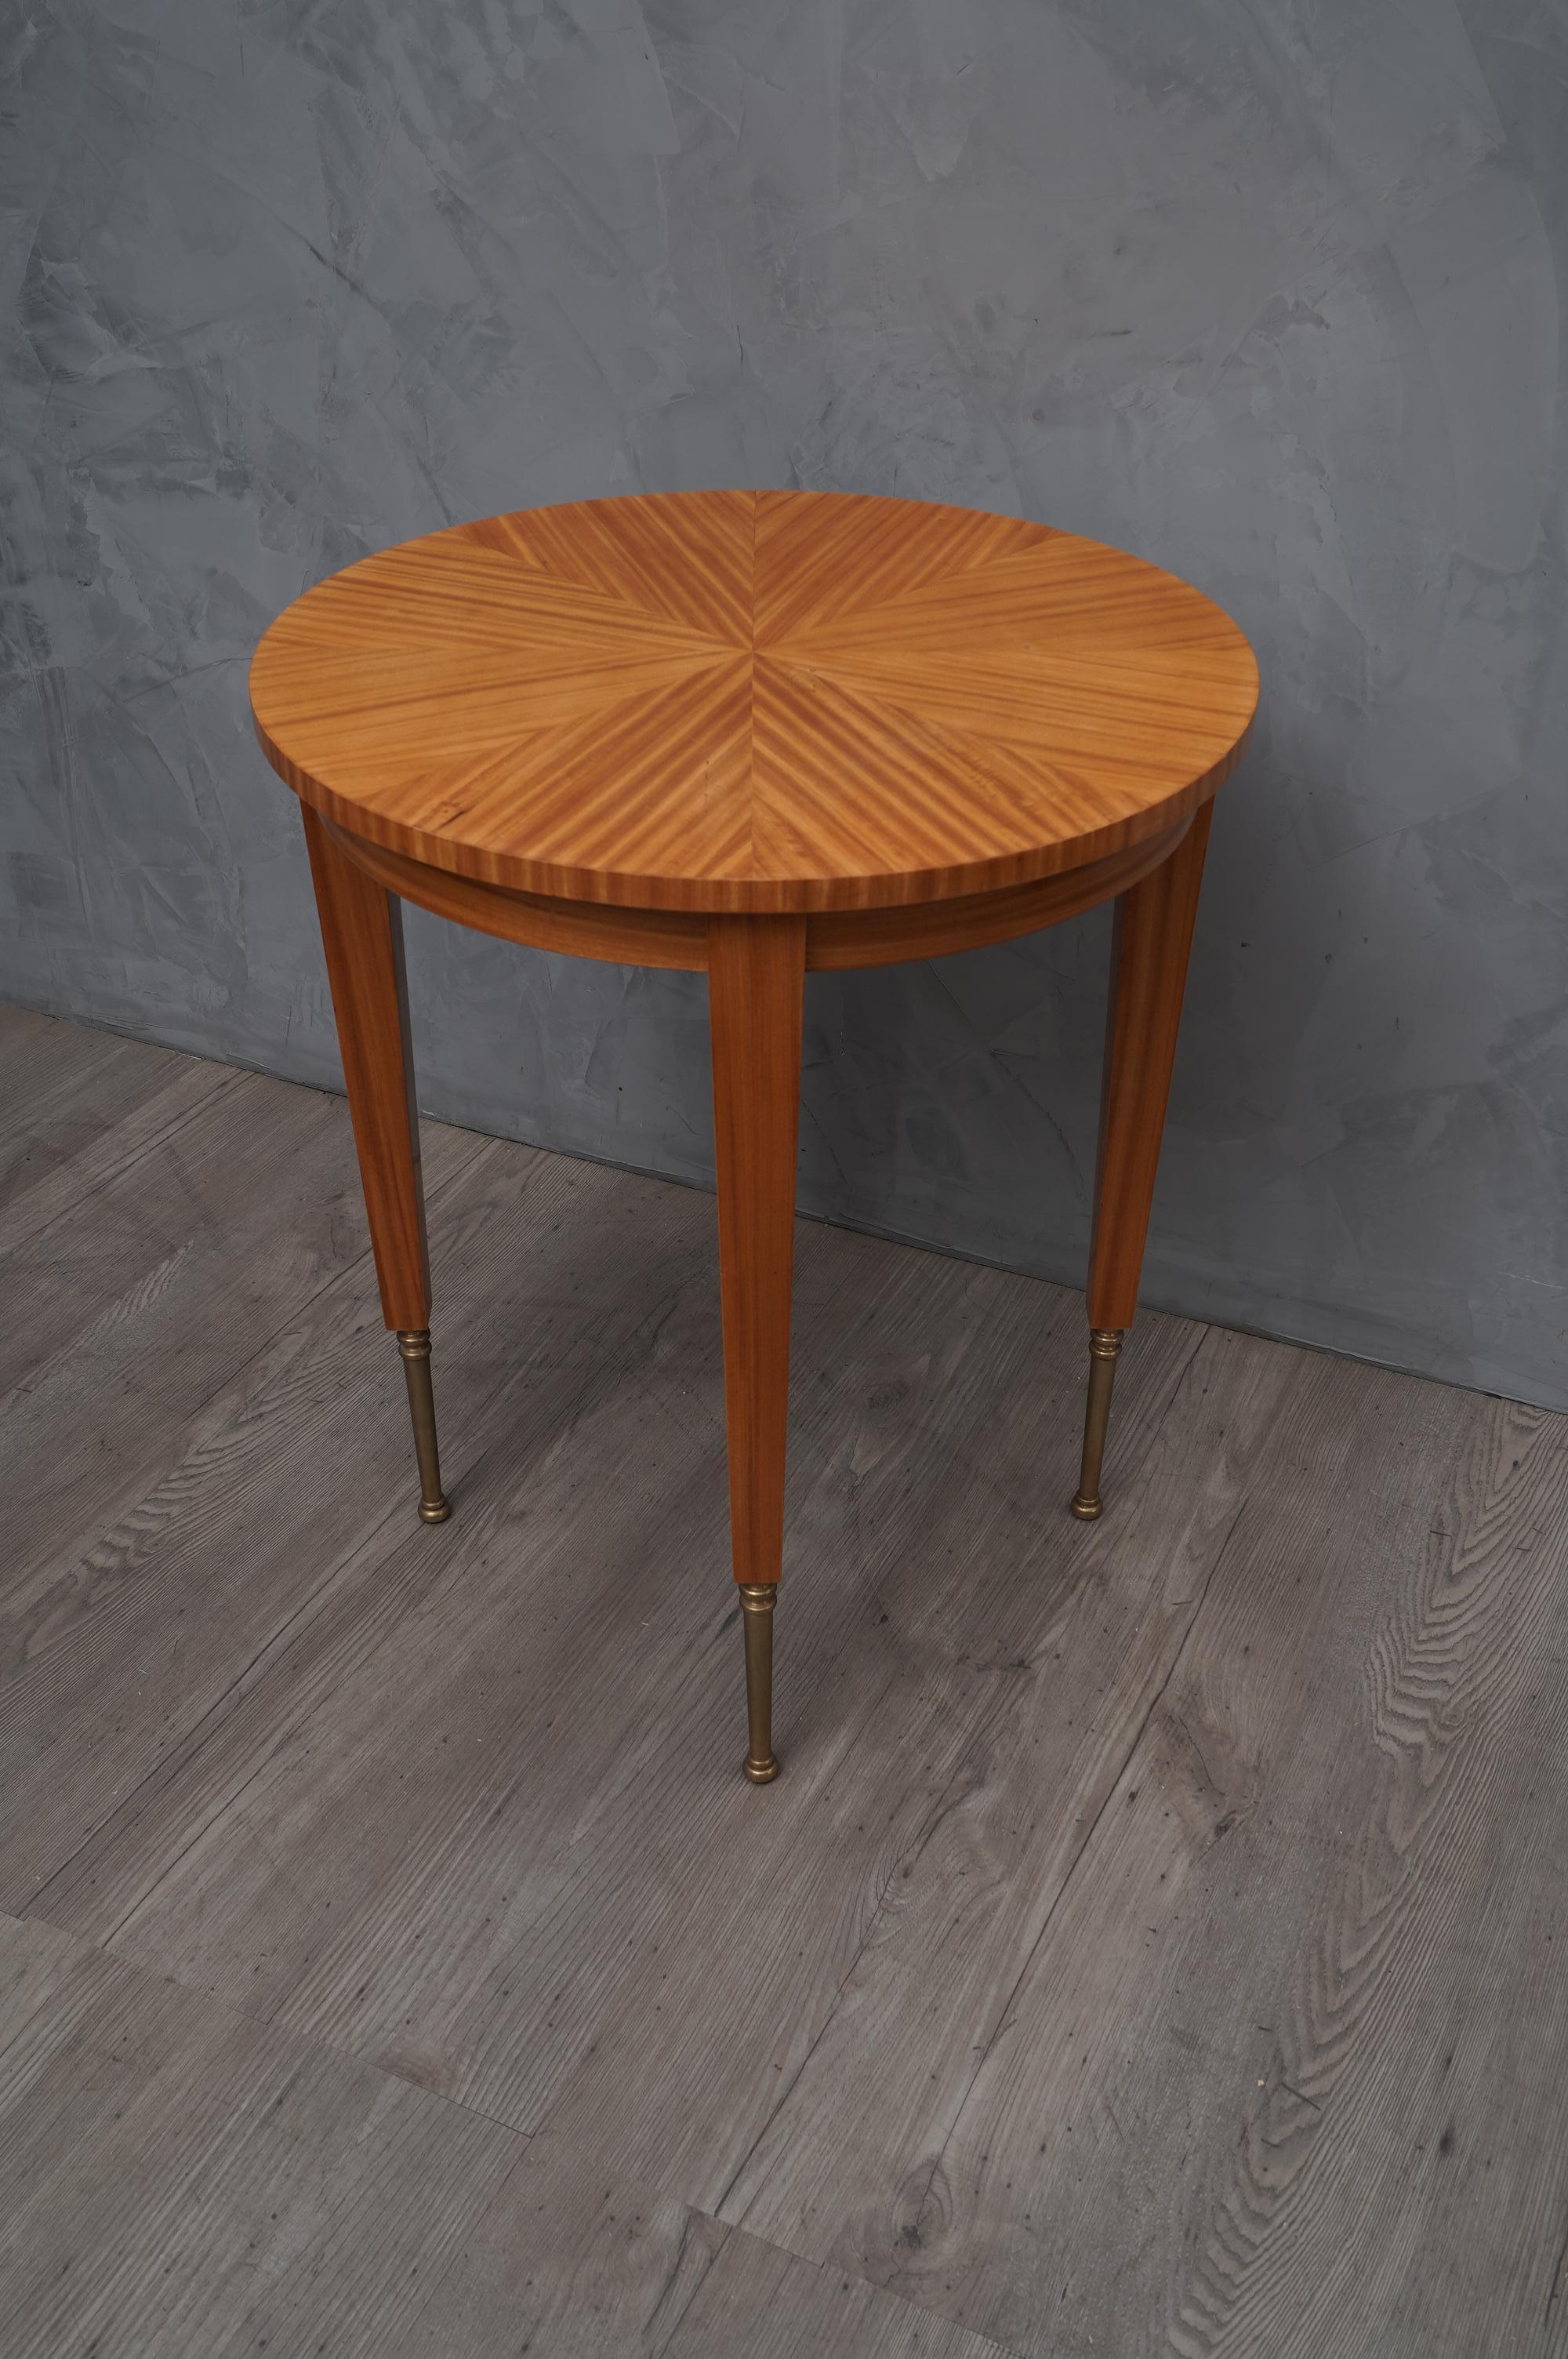 Very elegant appearance, and velvety veneer, for a couple of refined art deco side tables.

All veneered in satinwood. Of round shape, with four spiked legs, its foot is made of brass. Under the top there is a band that runs all around, here are